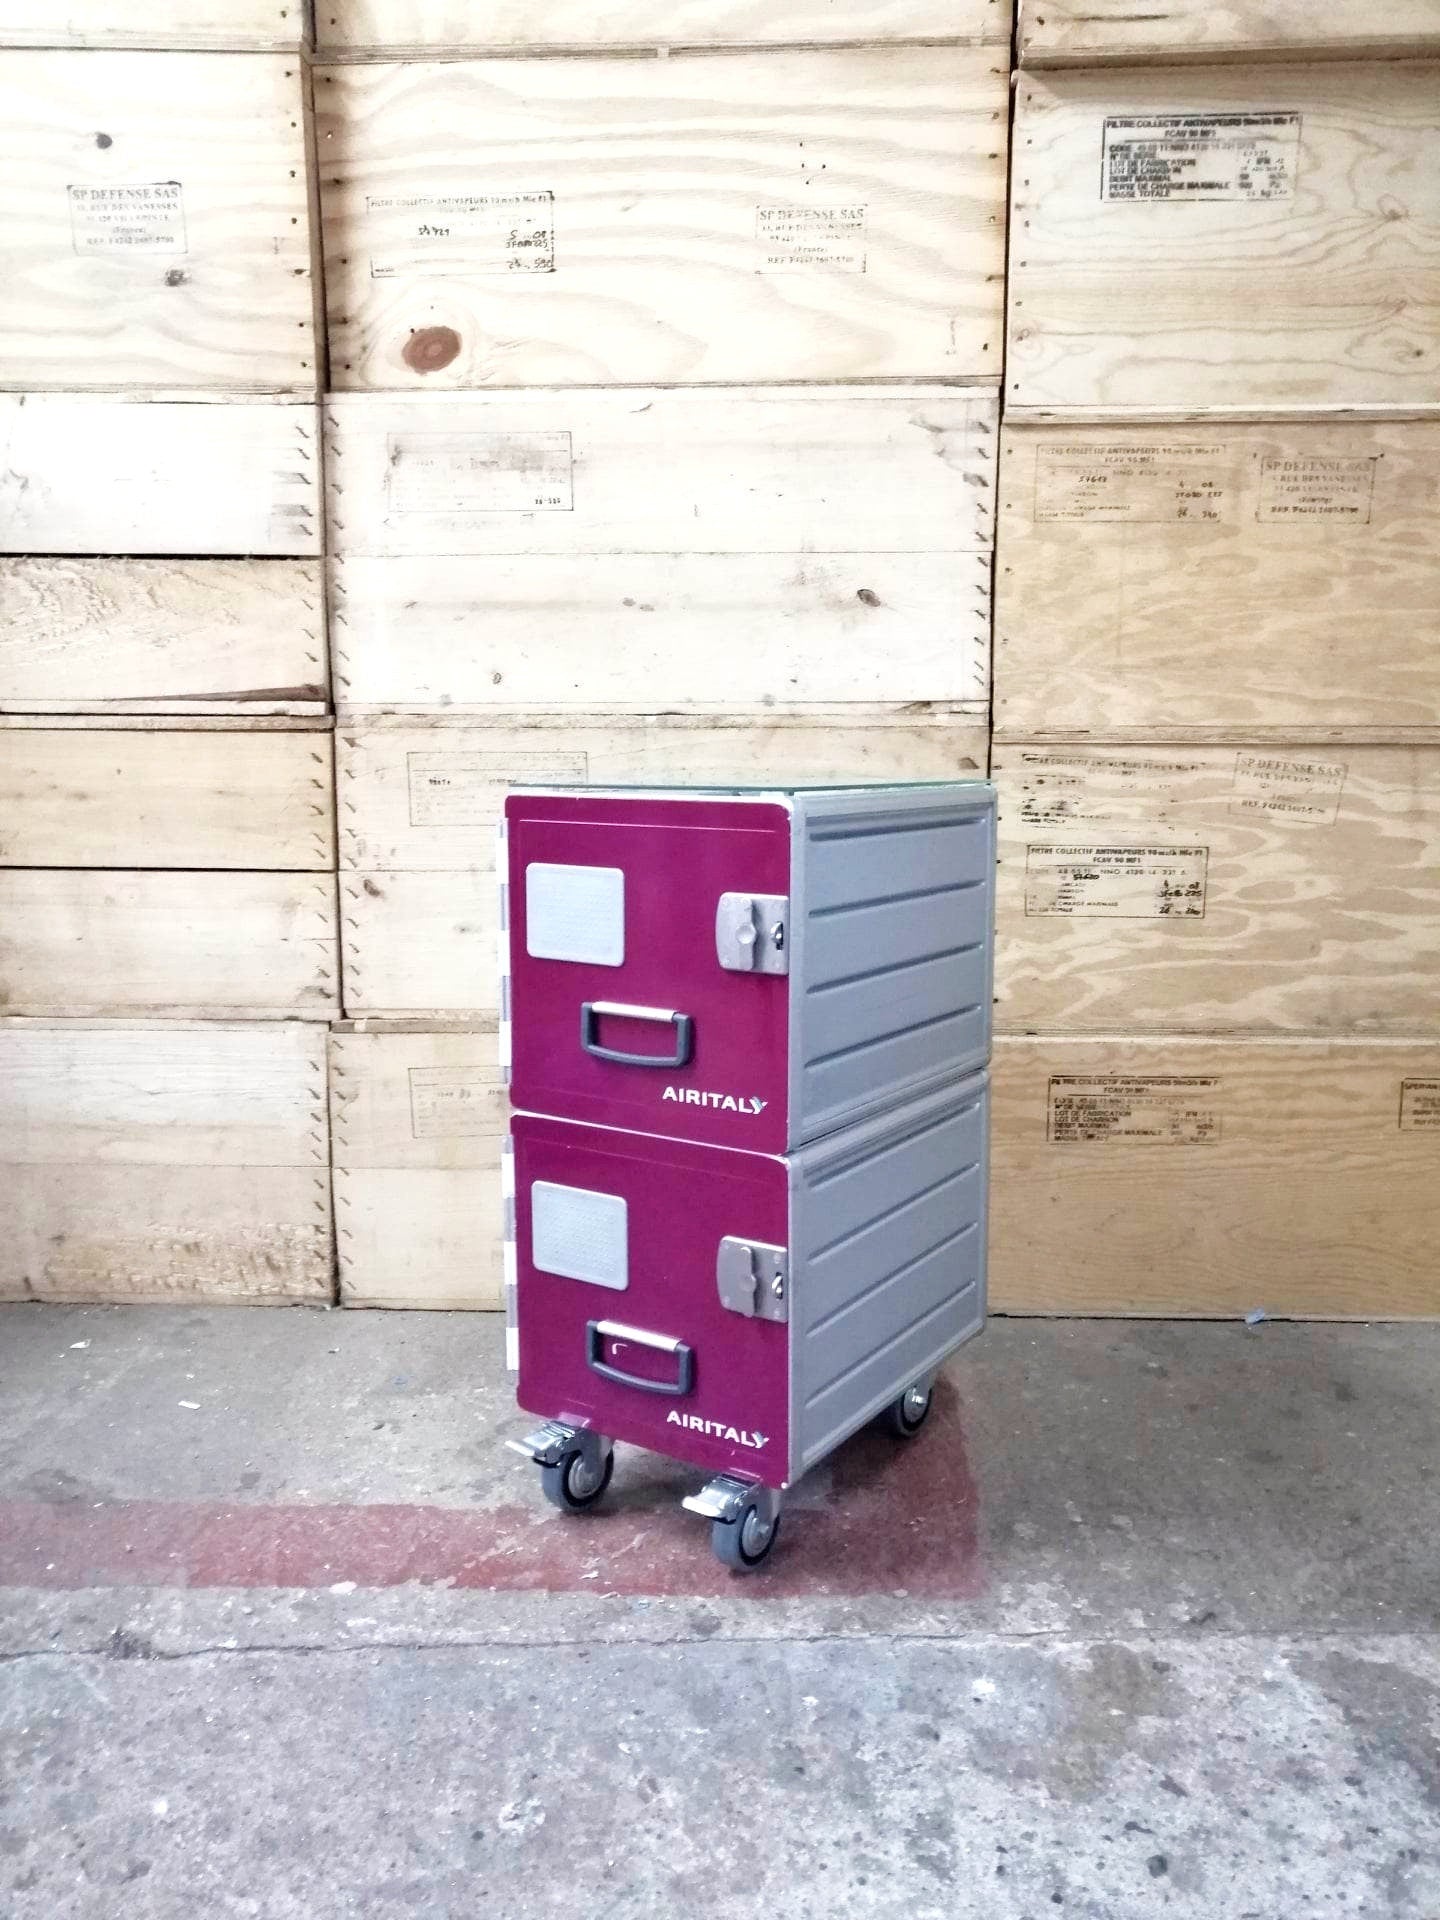 Aircraft Cabinet, Aviaton Storage Cart, Side Table Made of Original Airline Galley Boxes Air Italy, Handmade